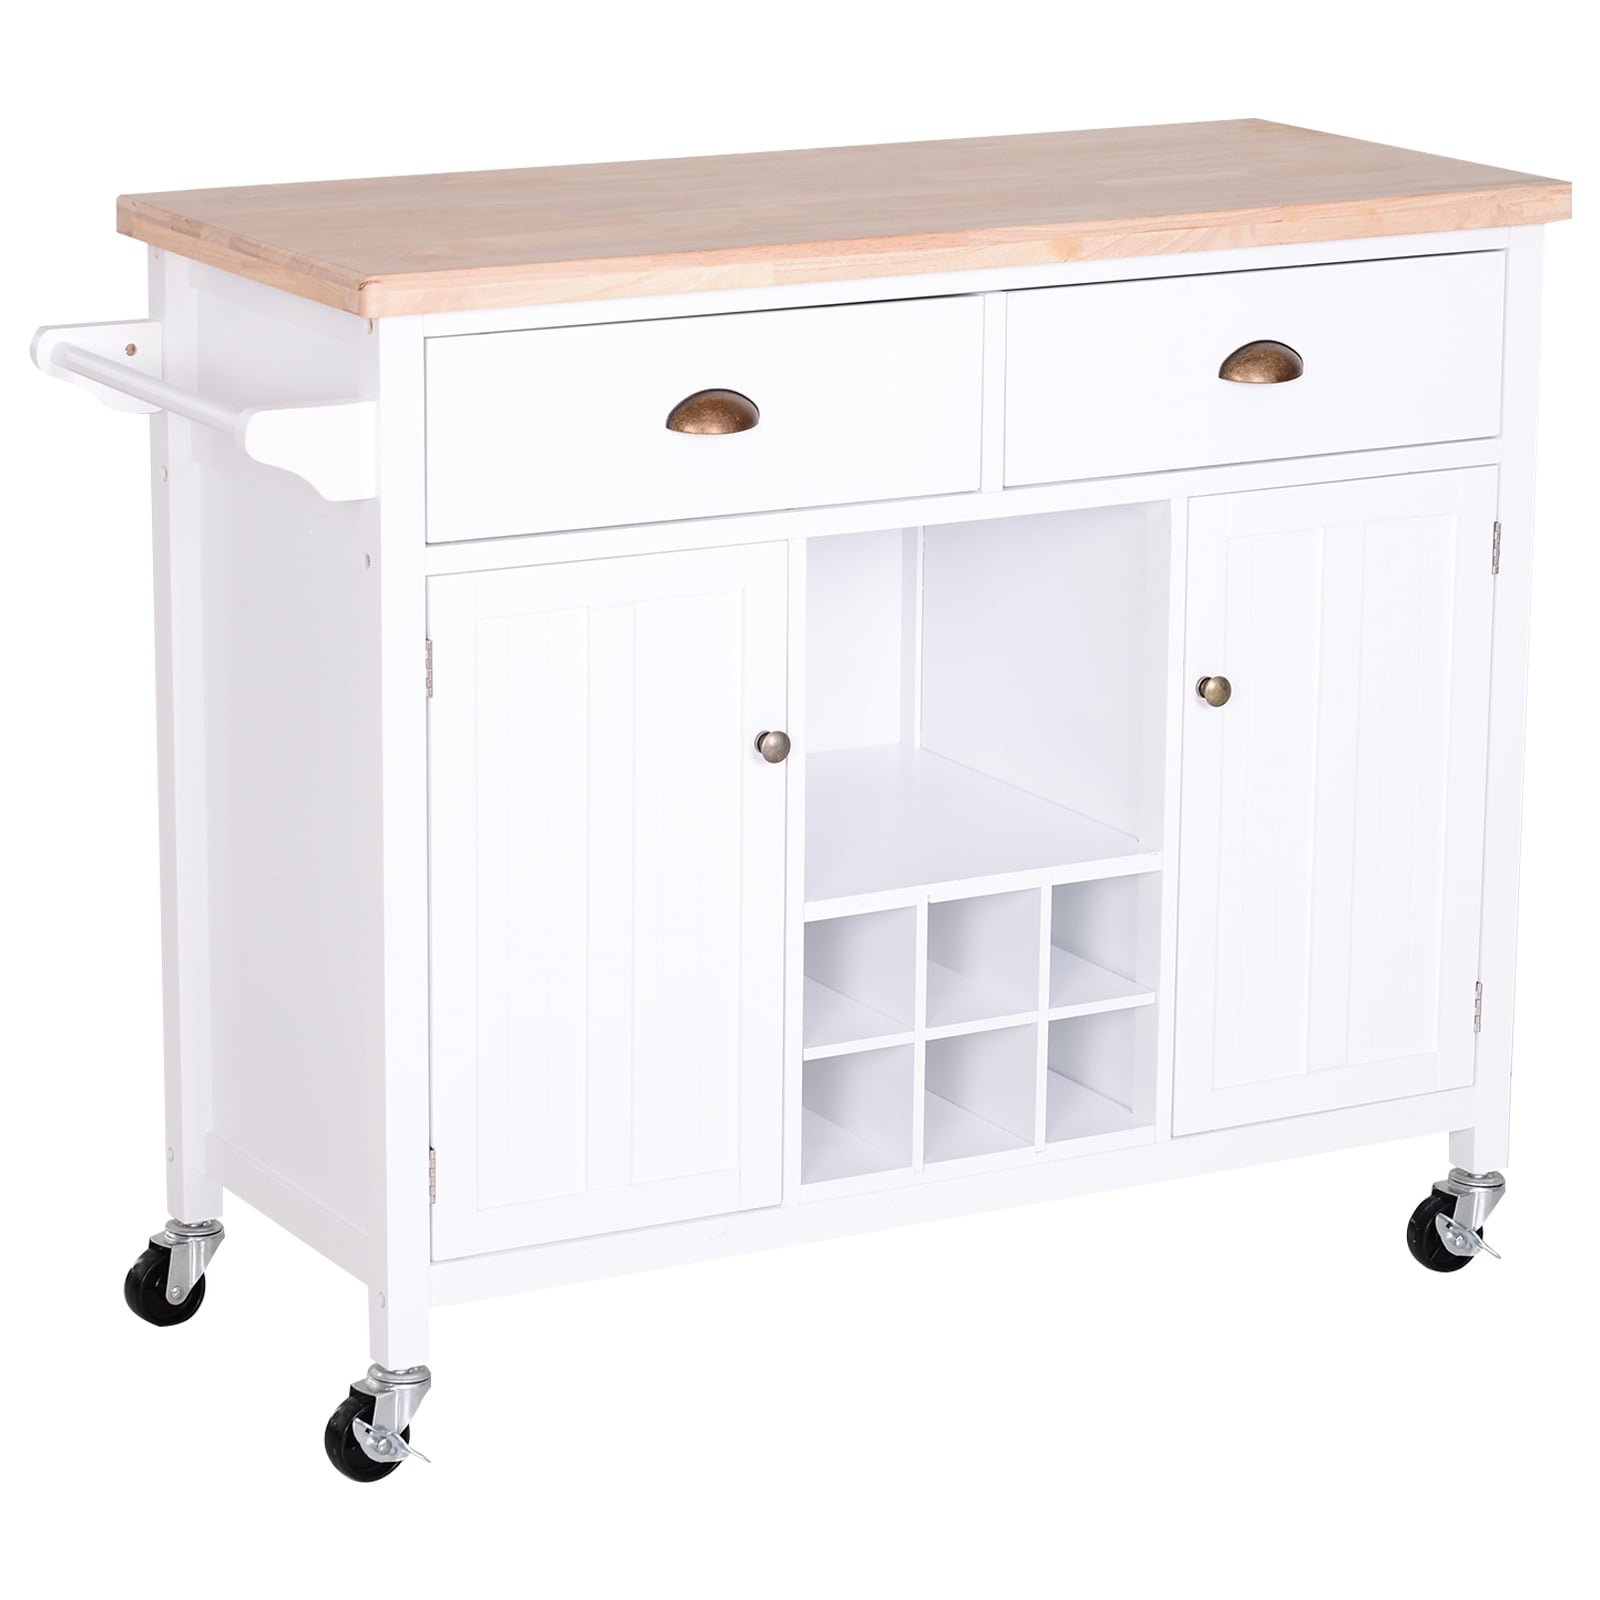 Homcom Kitchen Island Utility Cart On Wheels With Large Counter